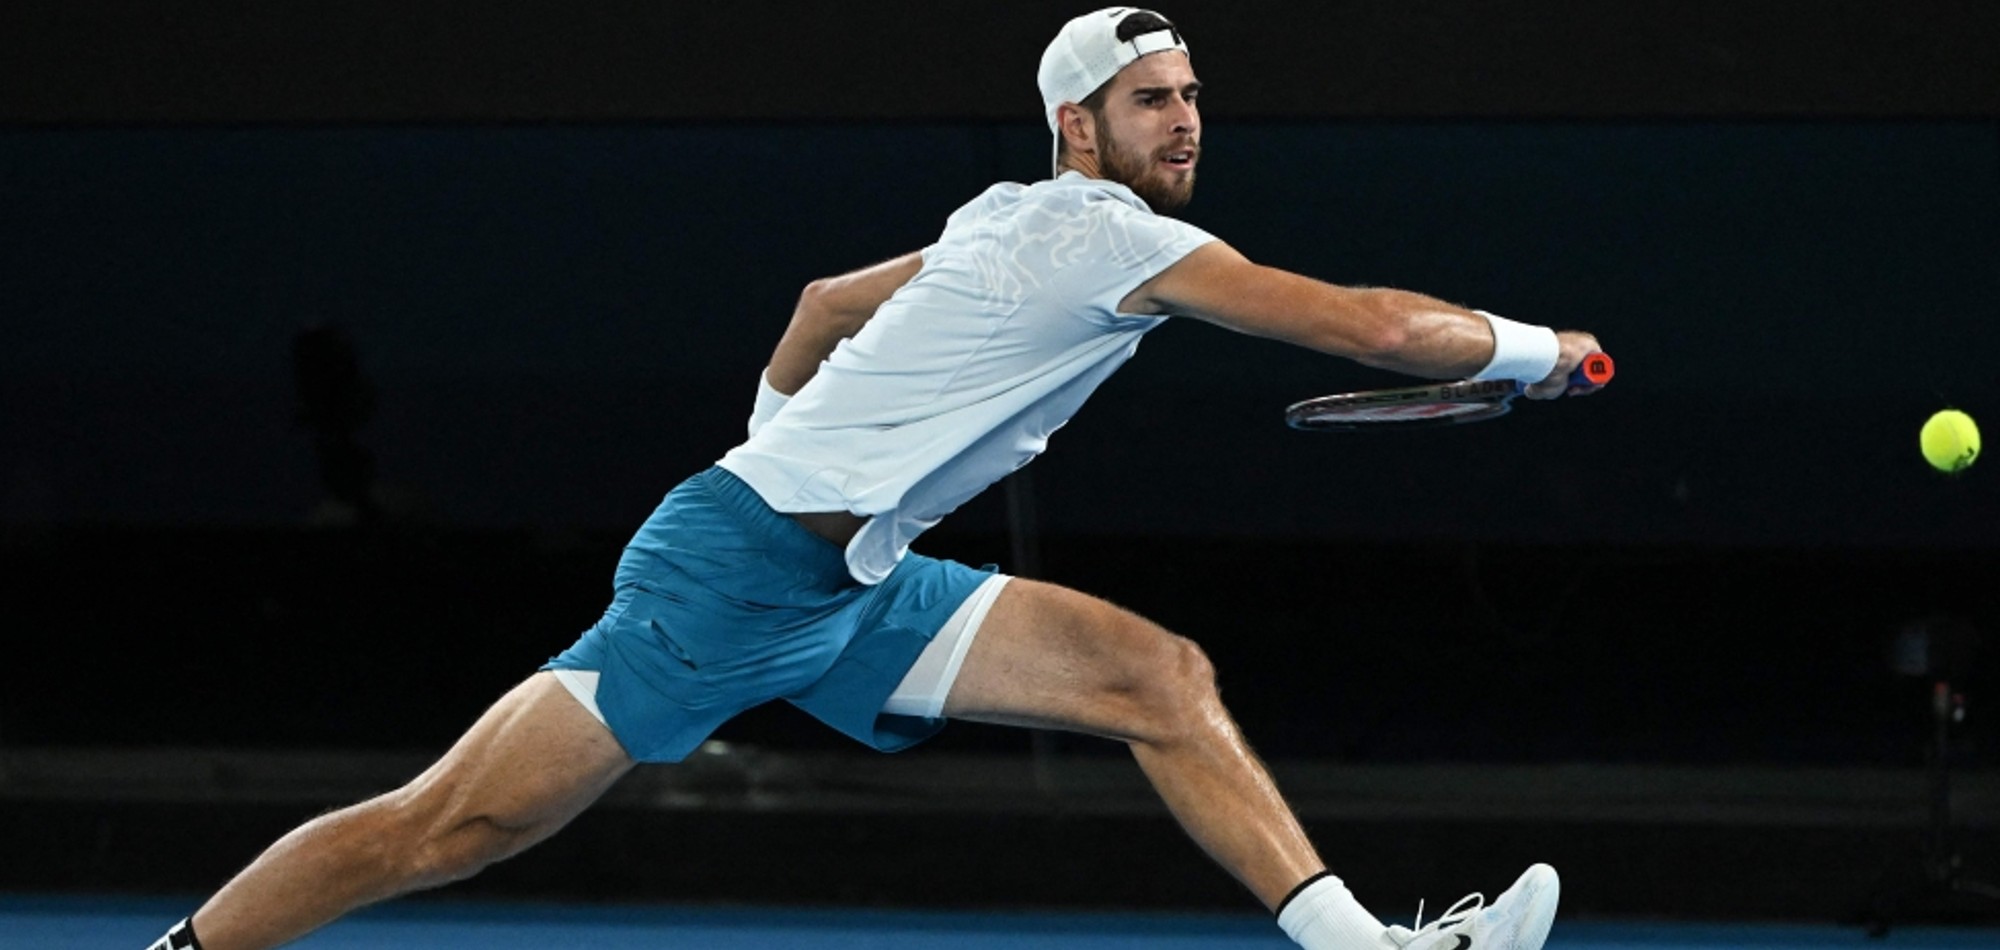 ITF says it has passed on letter by Azerbaijan federation about Khachanov to authorities